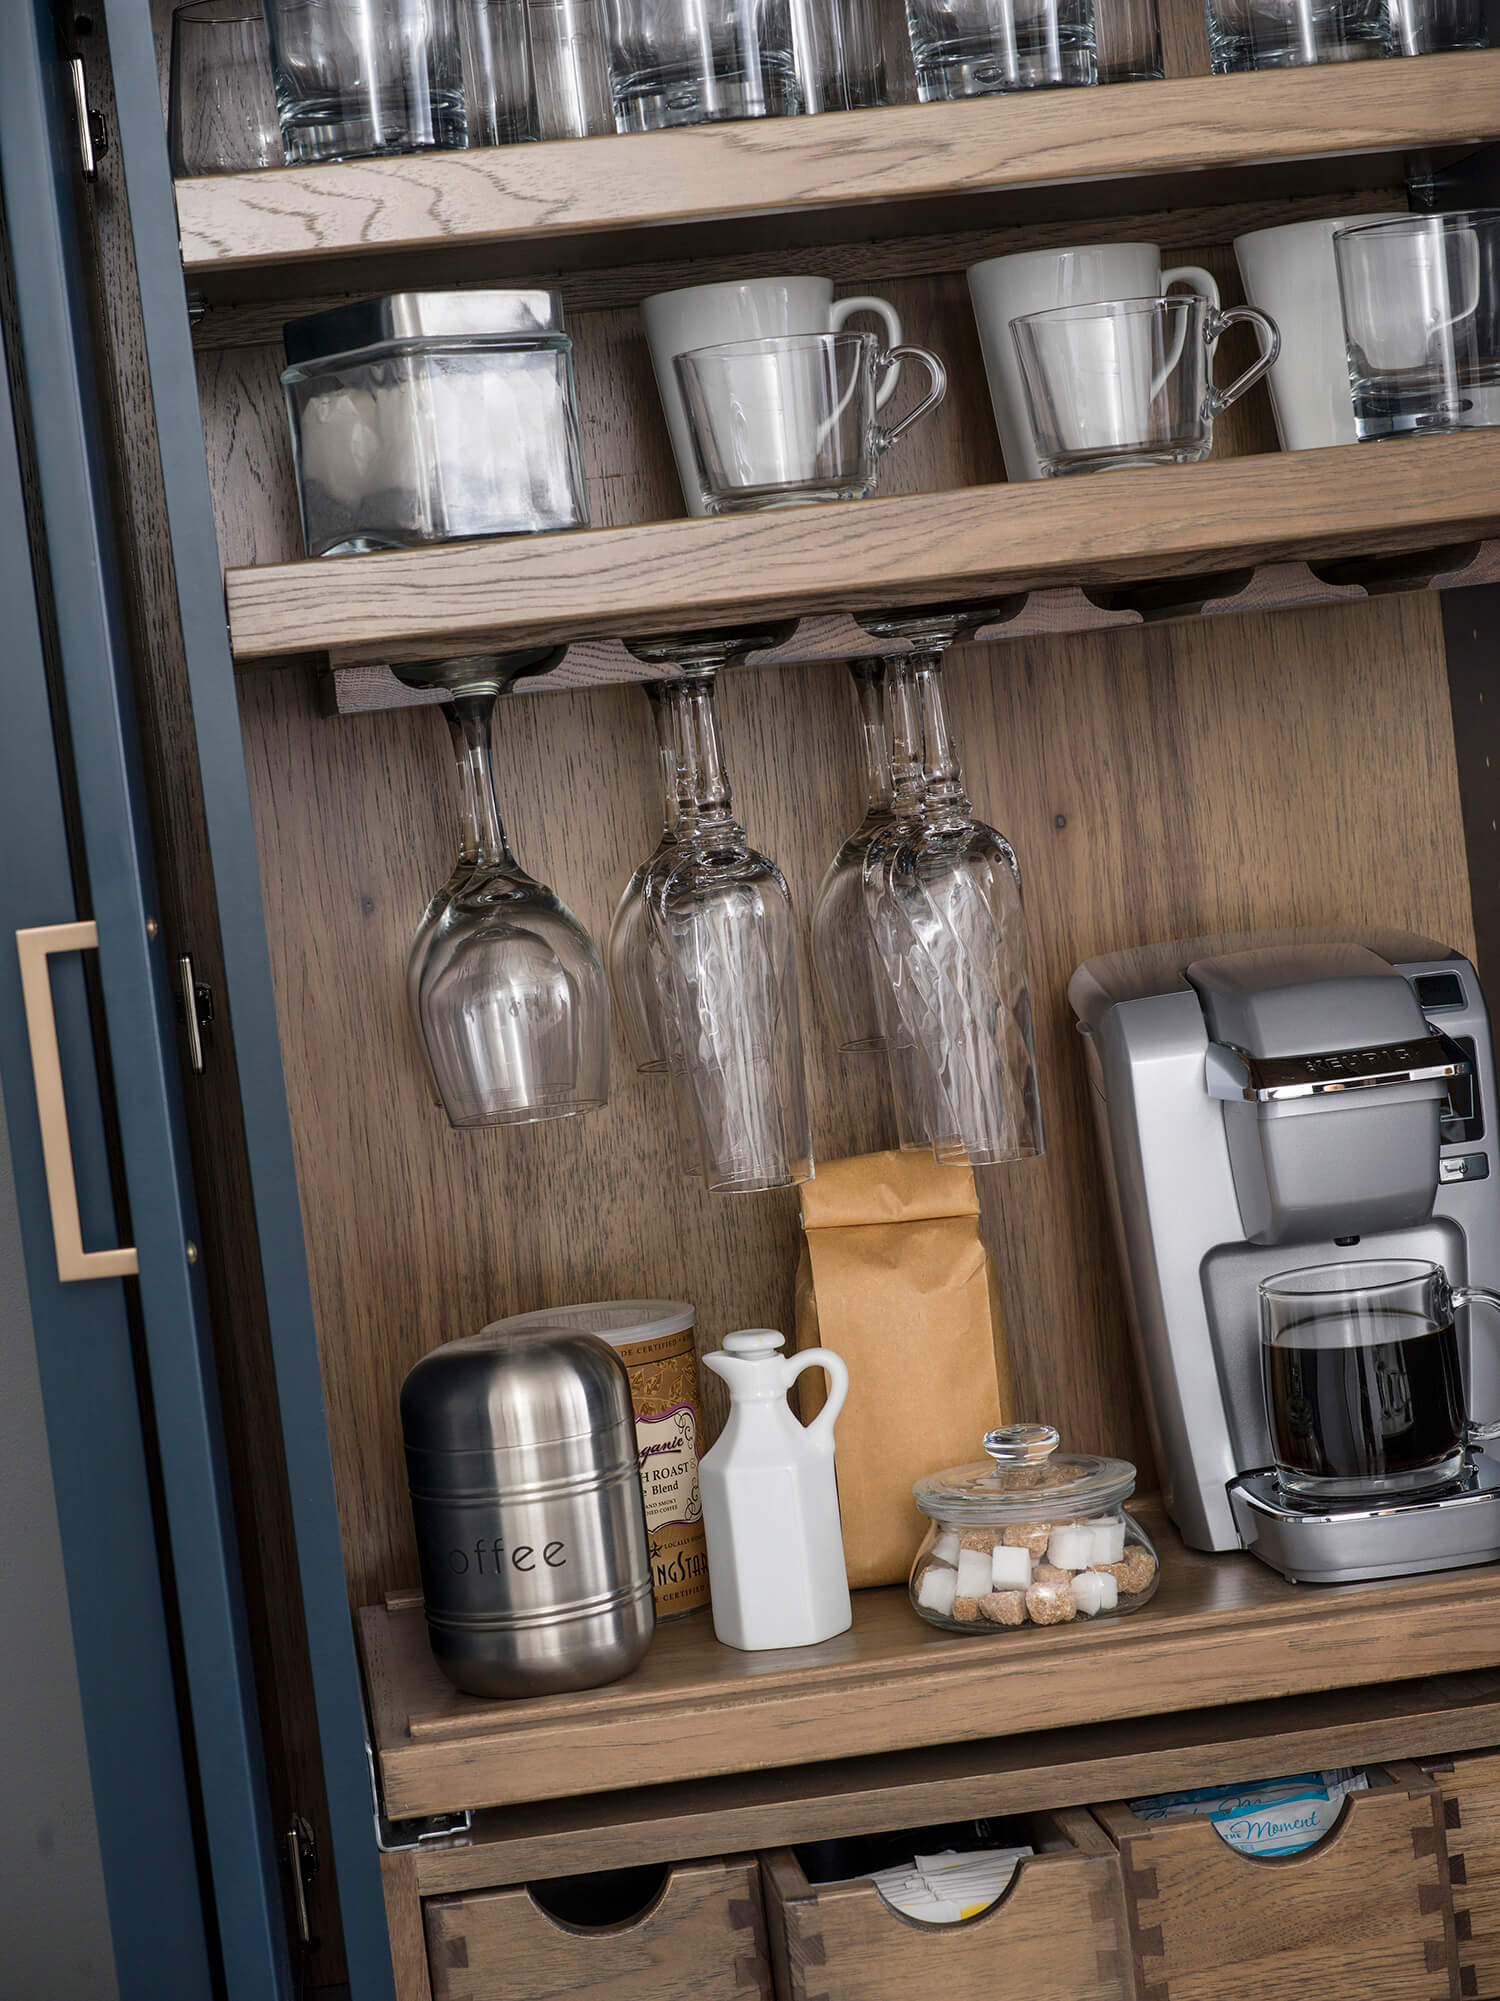 A beverage center larder cabinet with customized internal storage accessories including apothecary drawers, a flat roll-out shelf for a coffee maker or blender, and additional customized shelving.